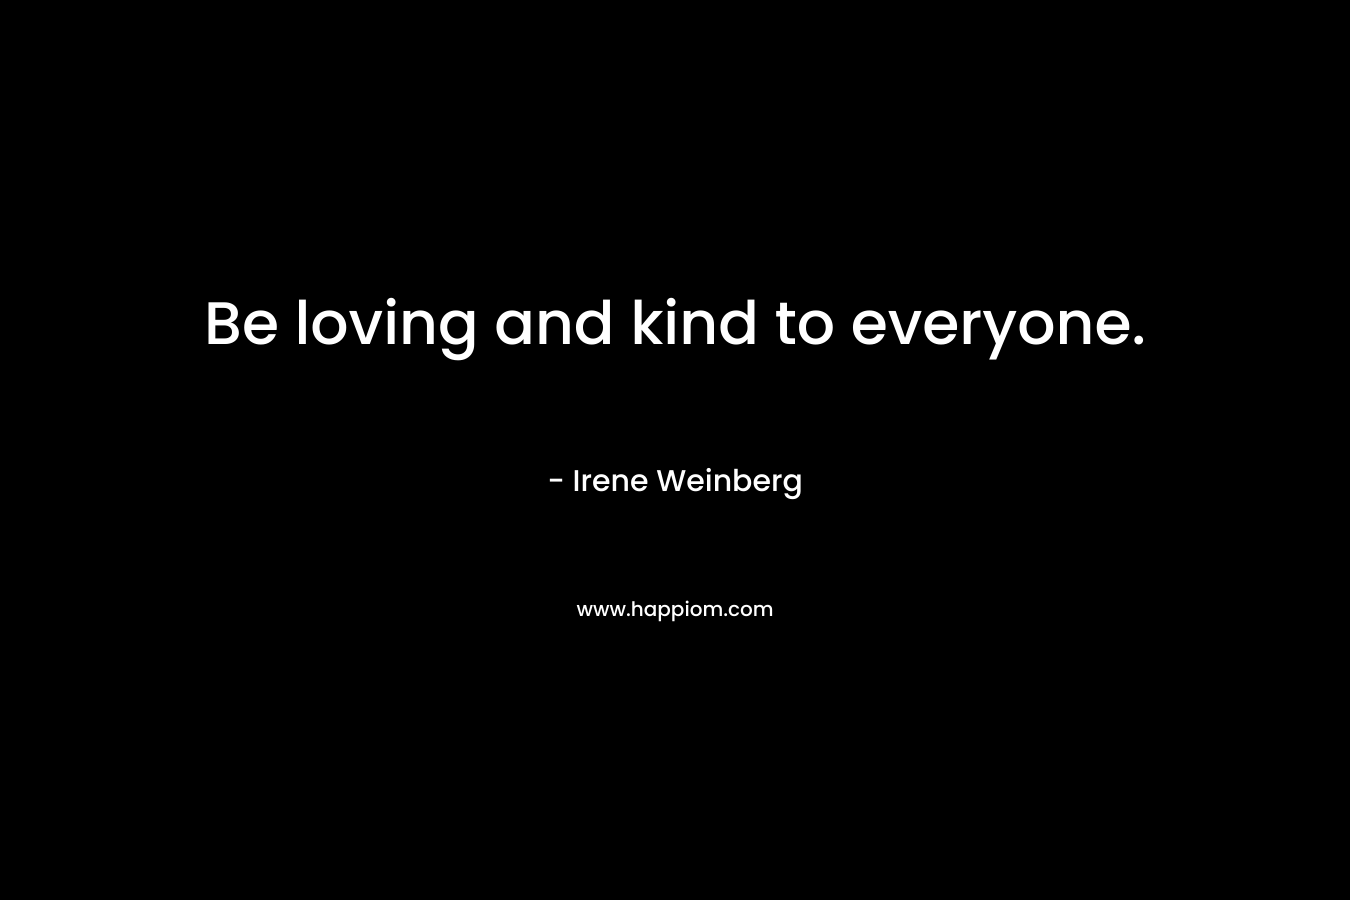 Be loving and kind to everyone.